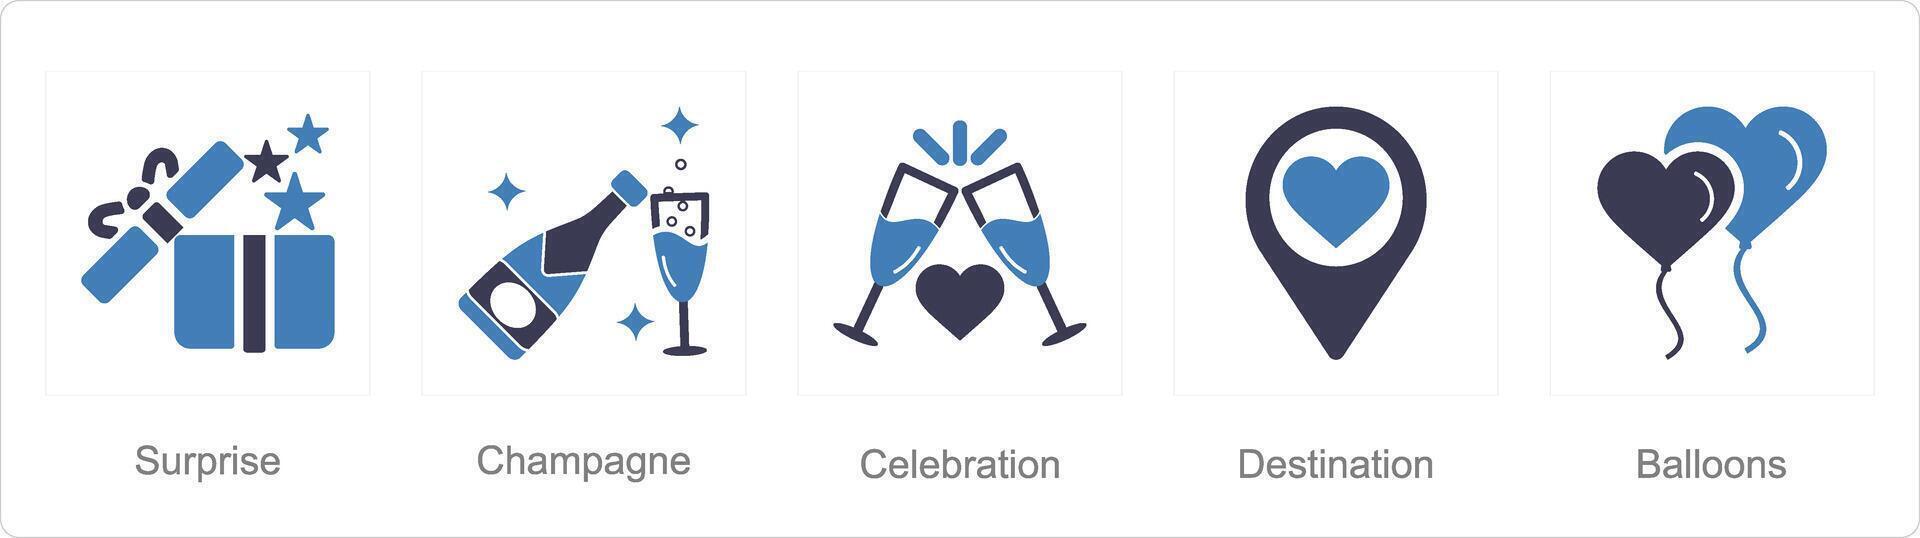 A set of 5 Honeymoon icons as surprise, champagne, celebration vector